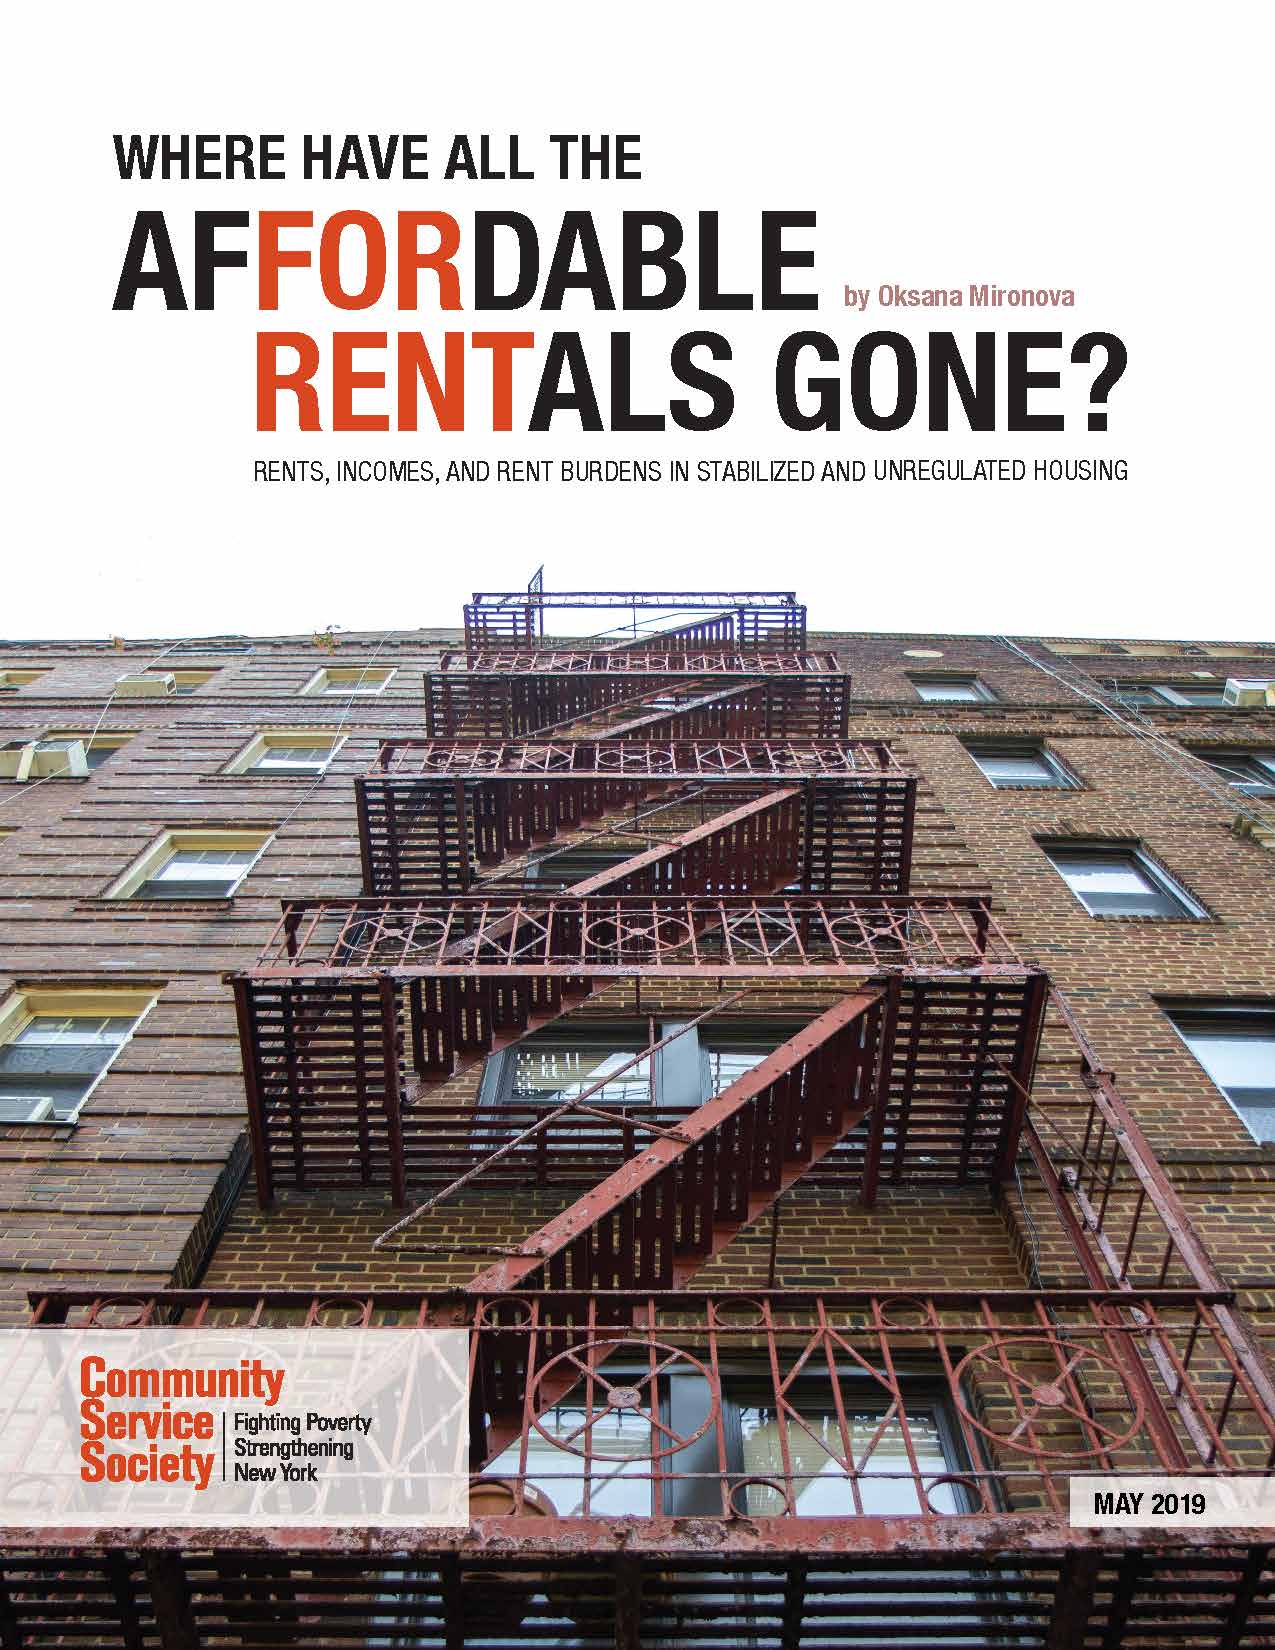 Where Have All the Affordable Rentals Gone? Rents, Incomes, and Rent Burdens in Stabilized and Unregulated Housing